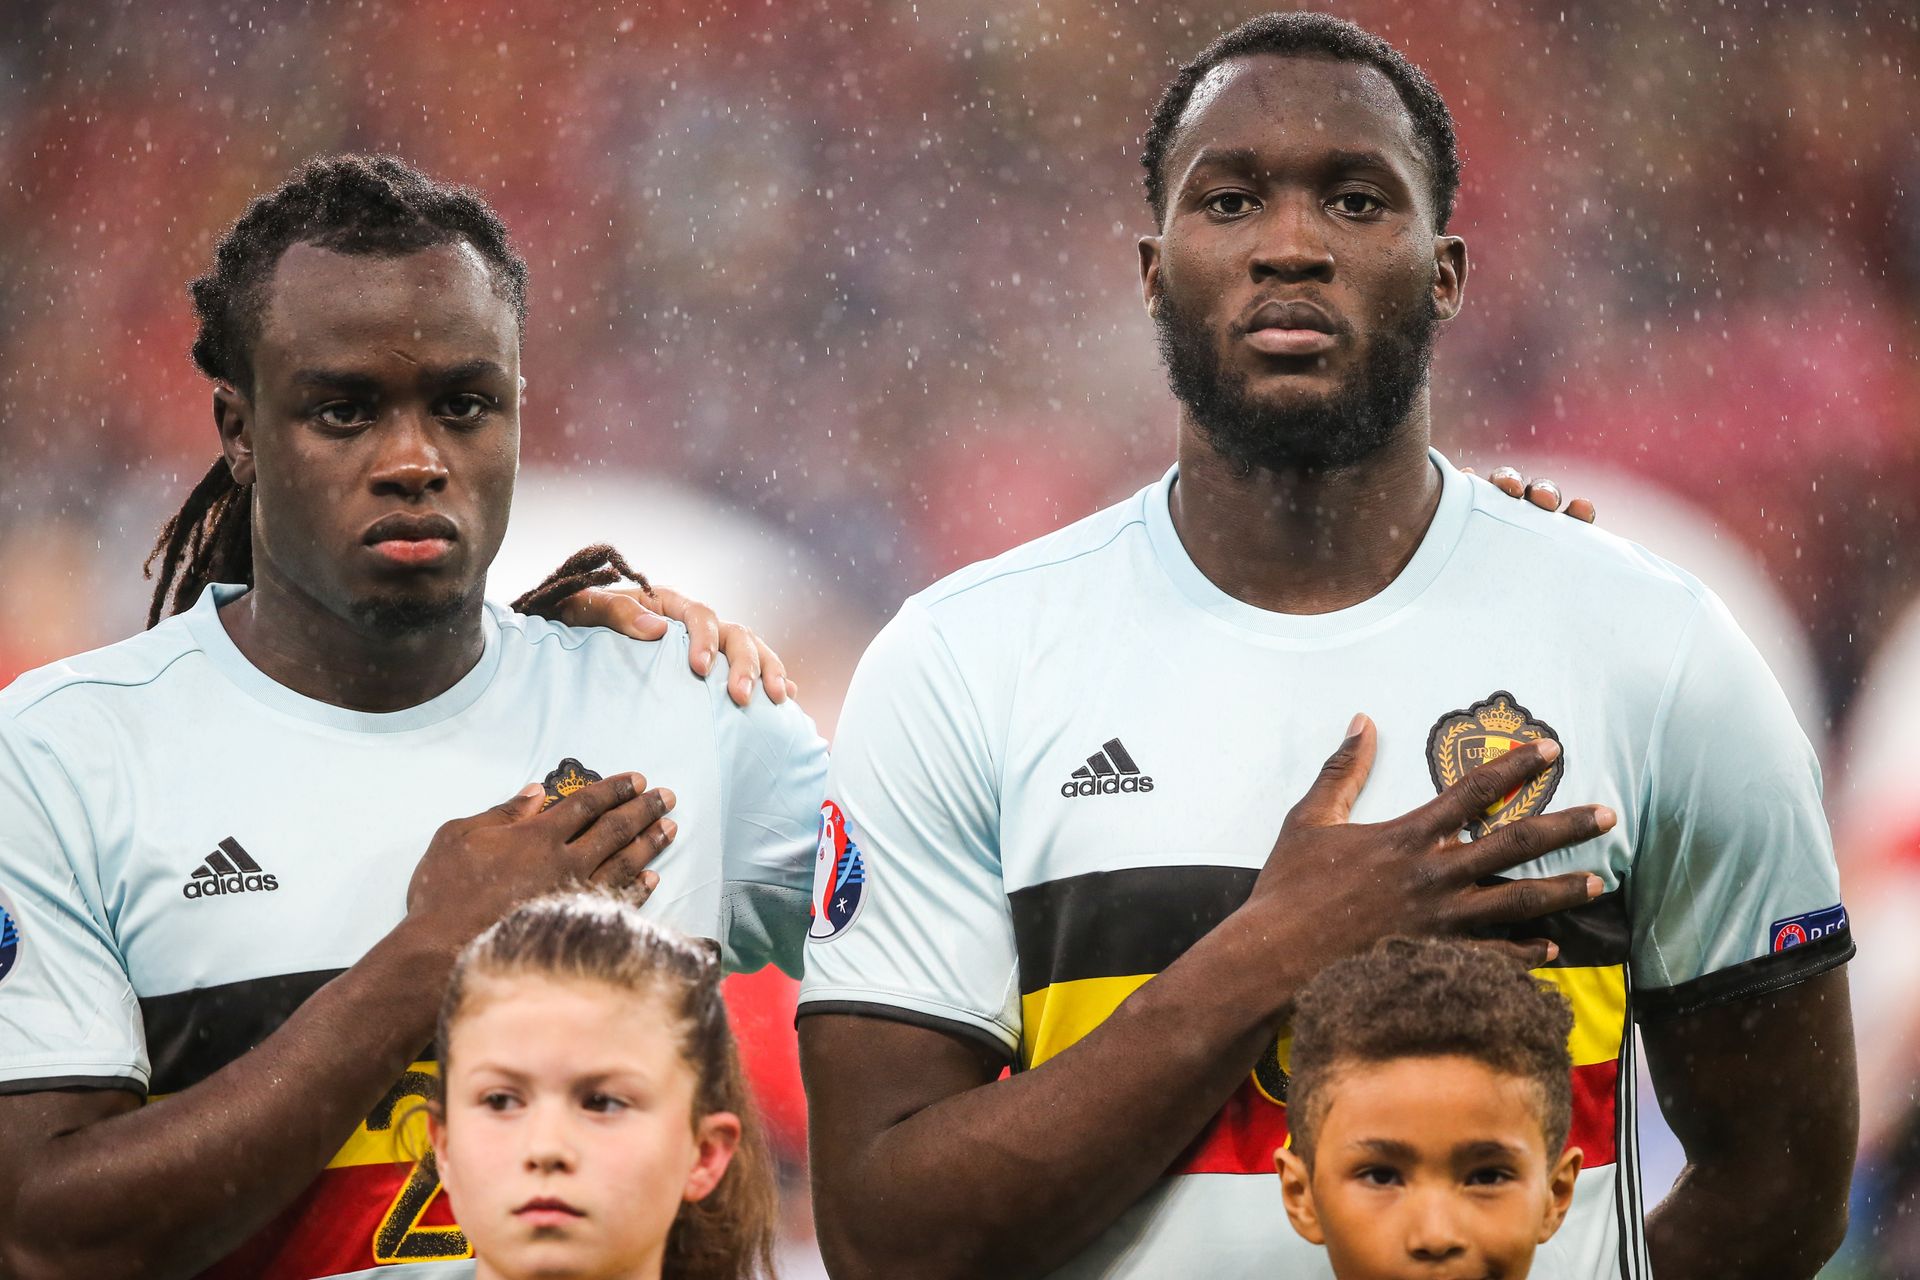 <p>                     Romelu Lukaku has played for some of Europe's biggest clubs, including Manchester United, Chelsea and Inter. The striker is also Belgium's all-time top goalscorer.                   </p>                                      <p>                     His younger brother Jordan is less acclaimed, but the left-back is also a Belgian international and at club level, is best known for a lengthy spell with Lazio in Serie A.                   </p>